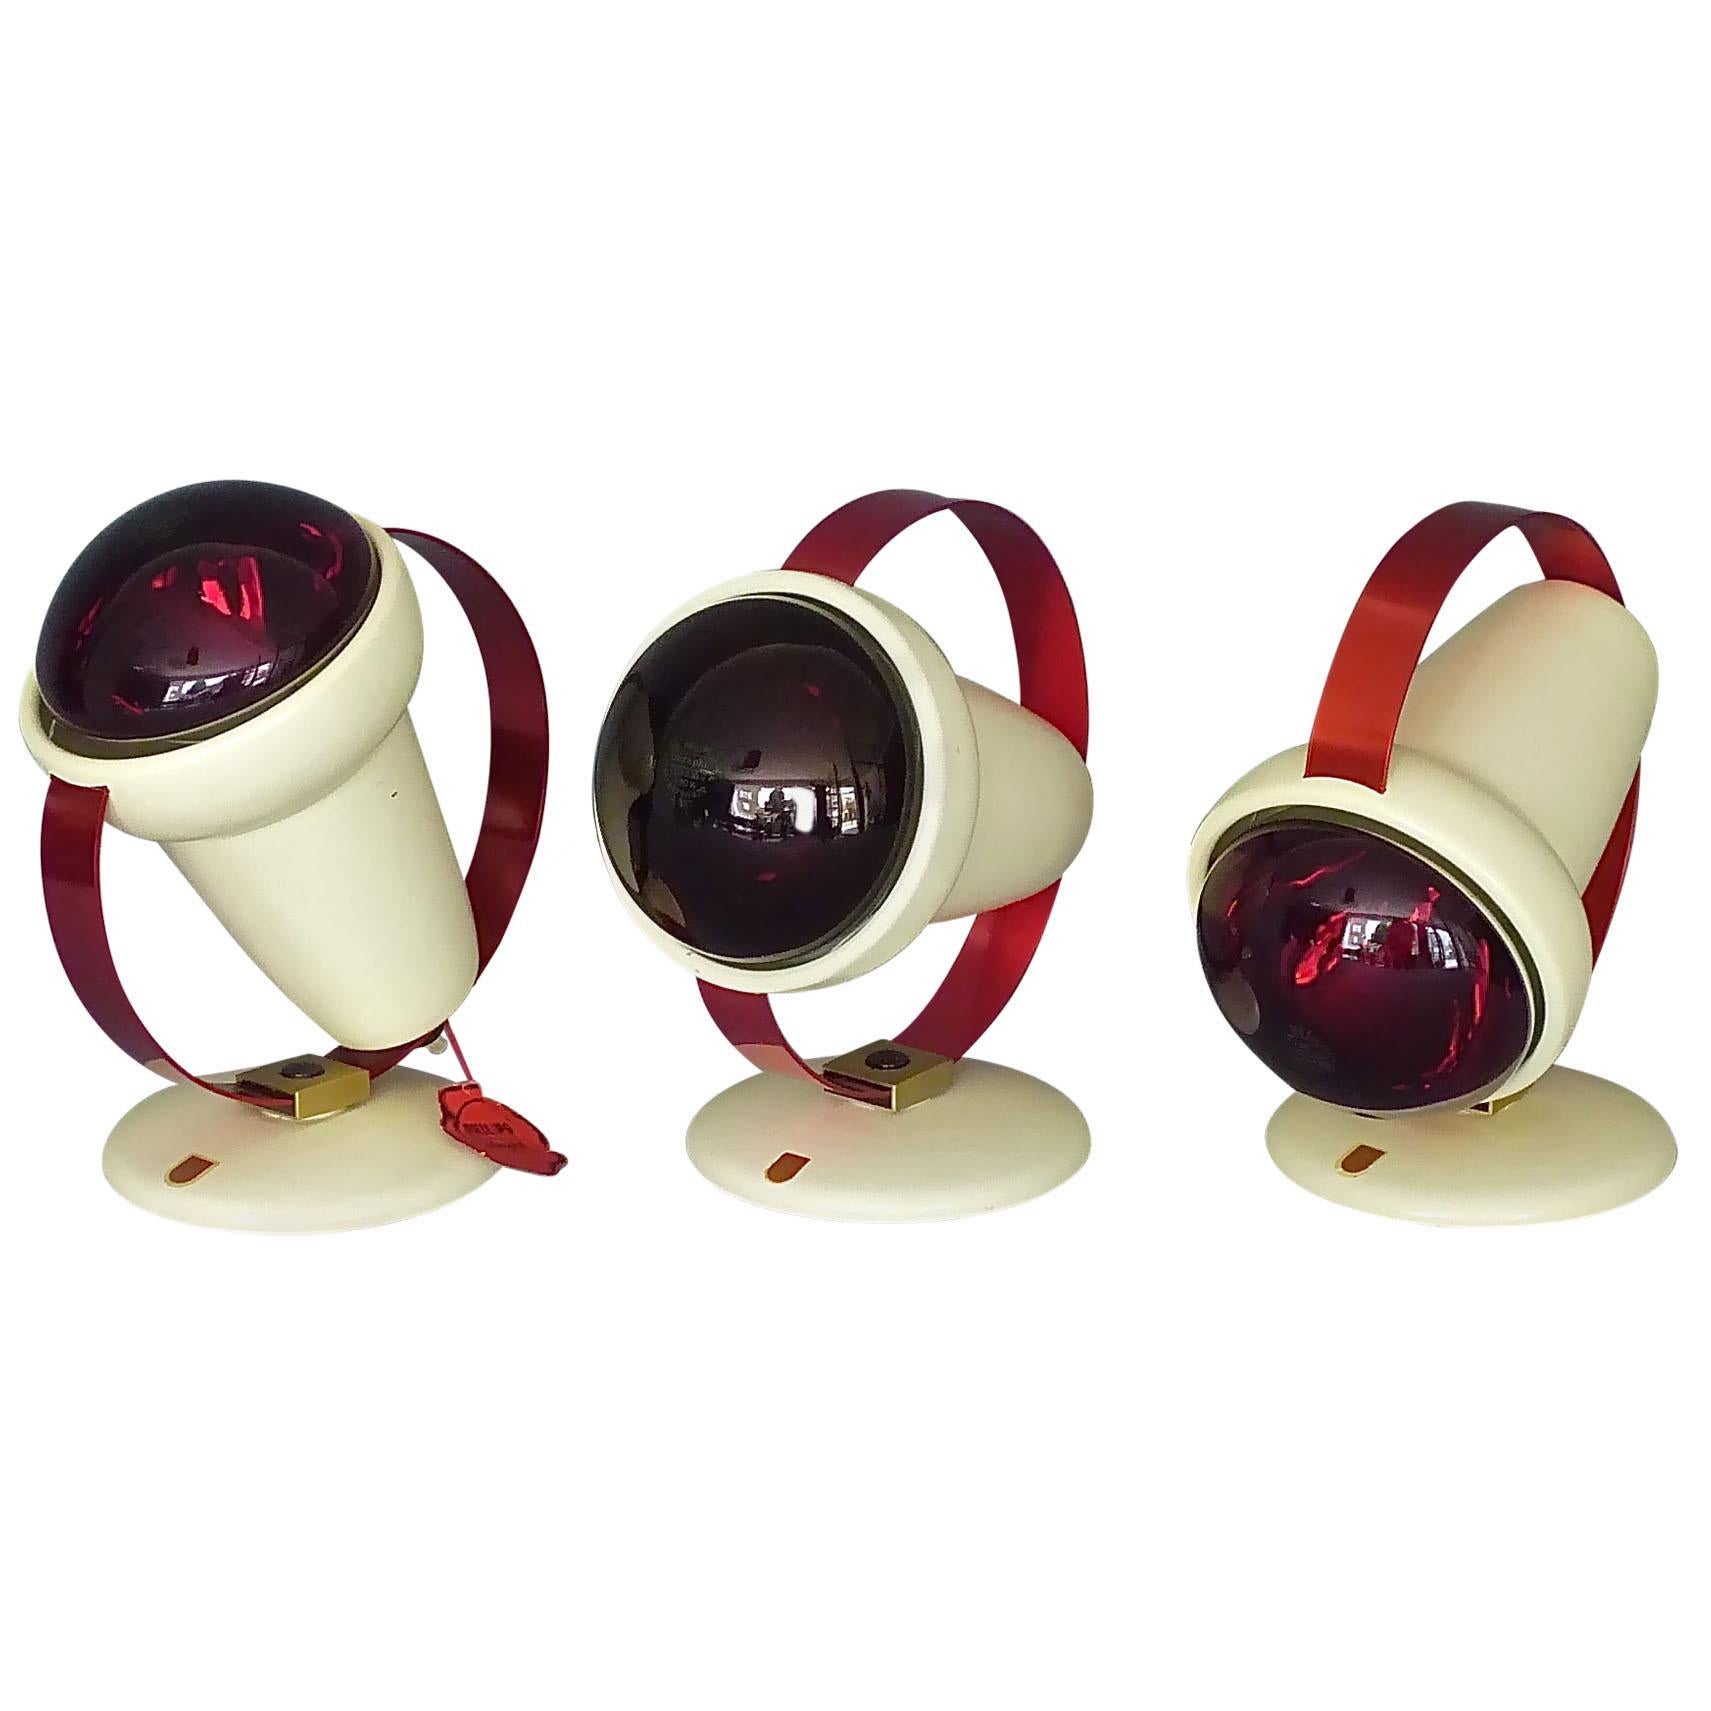 Charlotte Perriand Table Wall Lamps for Philips Set of Three Red Spaceage Lights